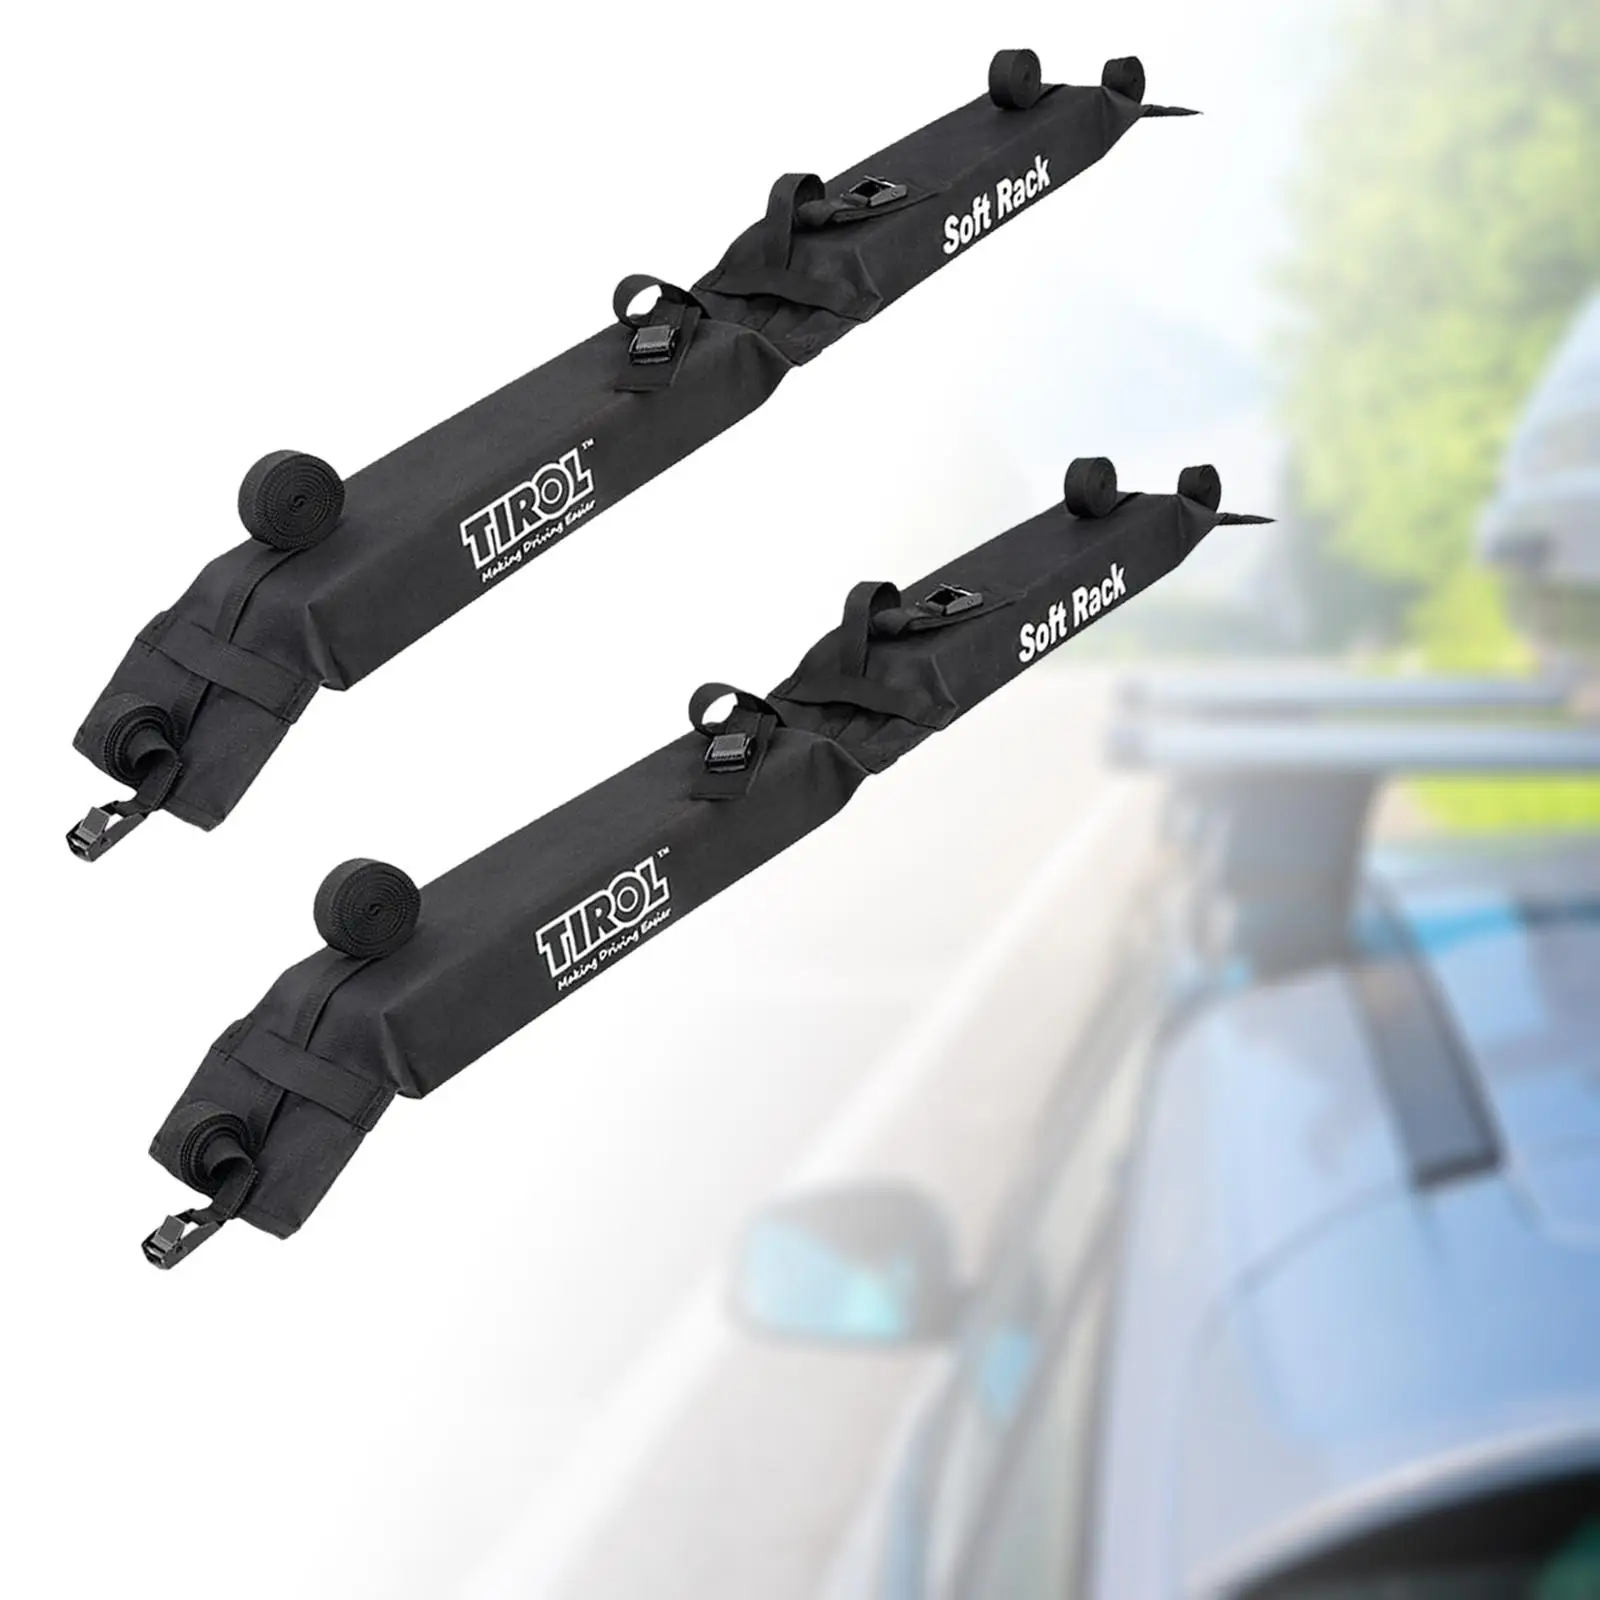 Car Auto Roof Rack Carrier Rack Pads for Kayak Luggage Carrier